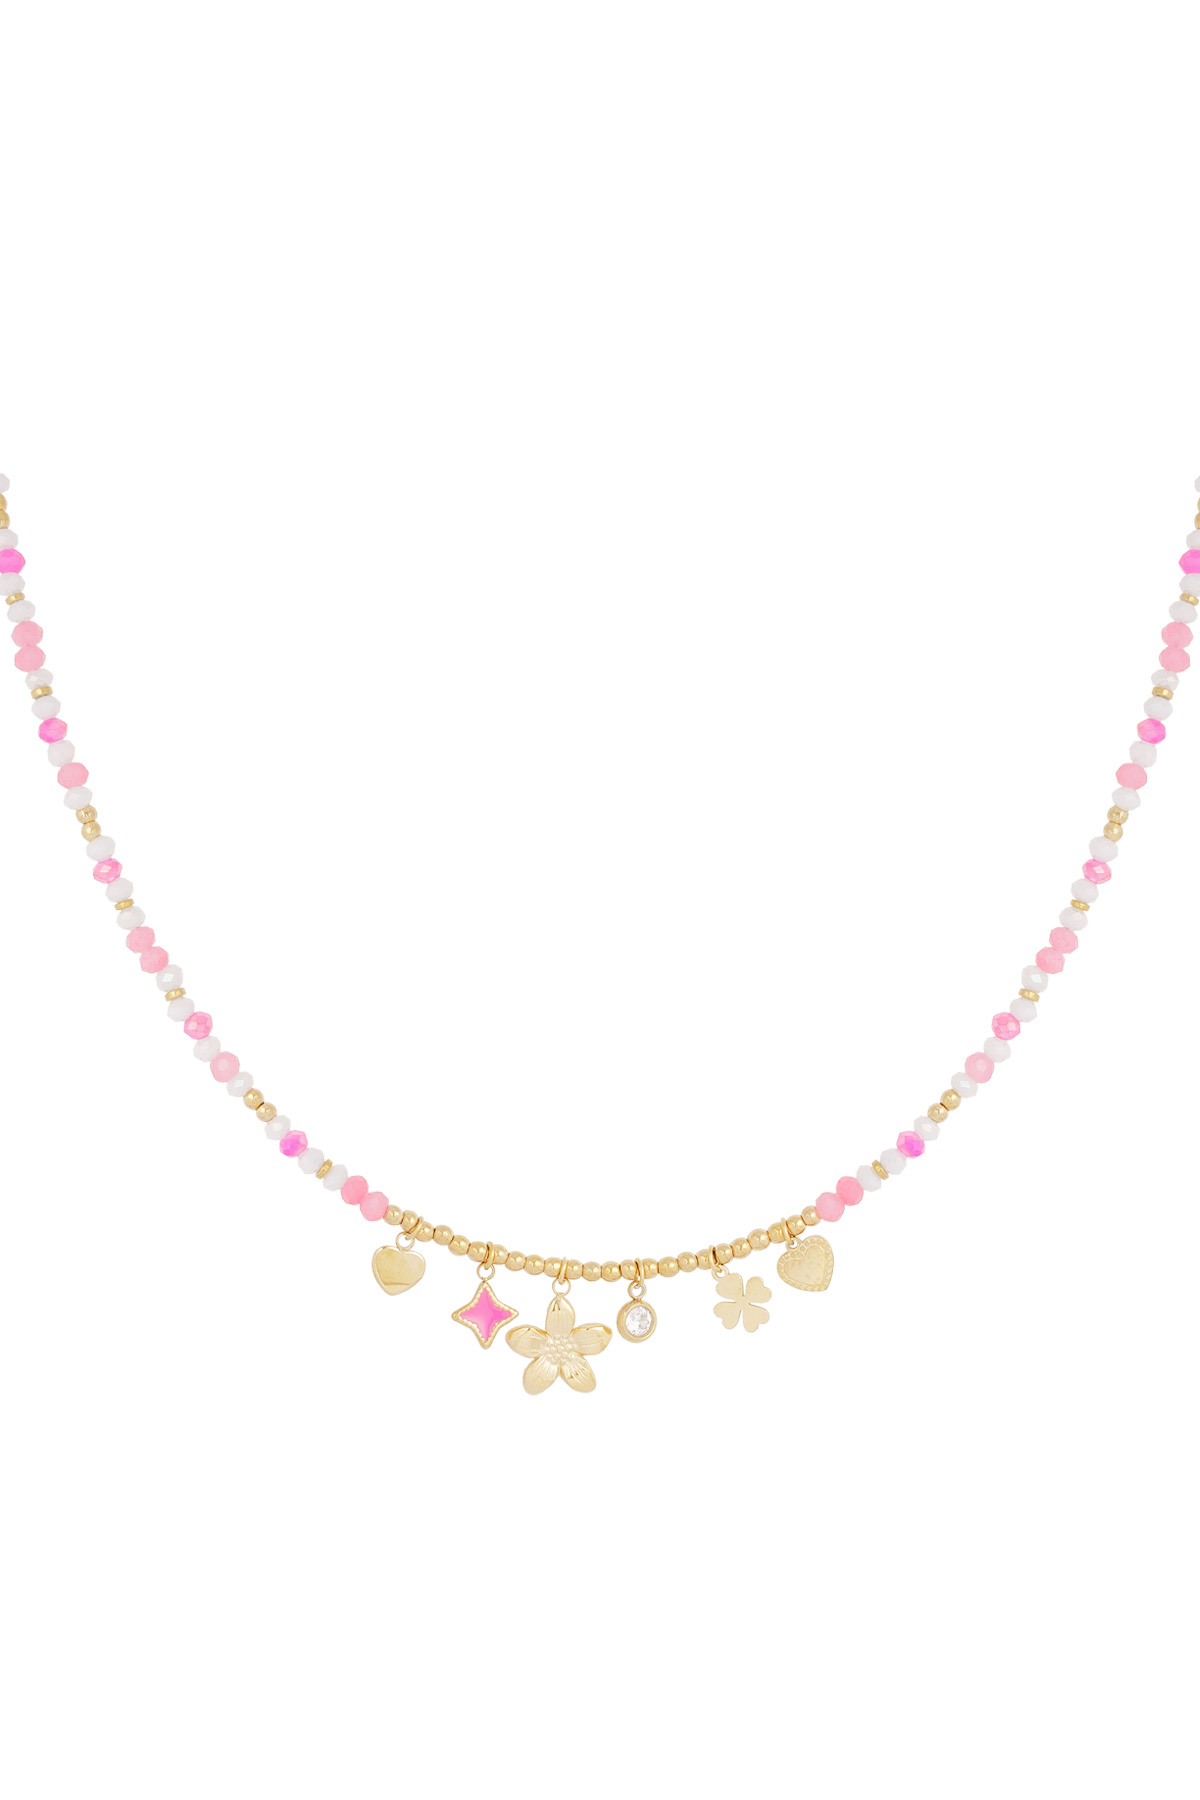 Colorful necklace summer lover - pink gold